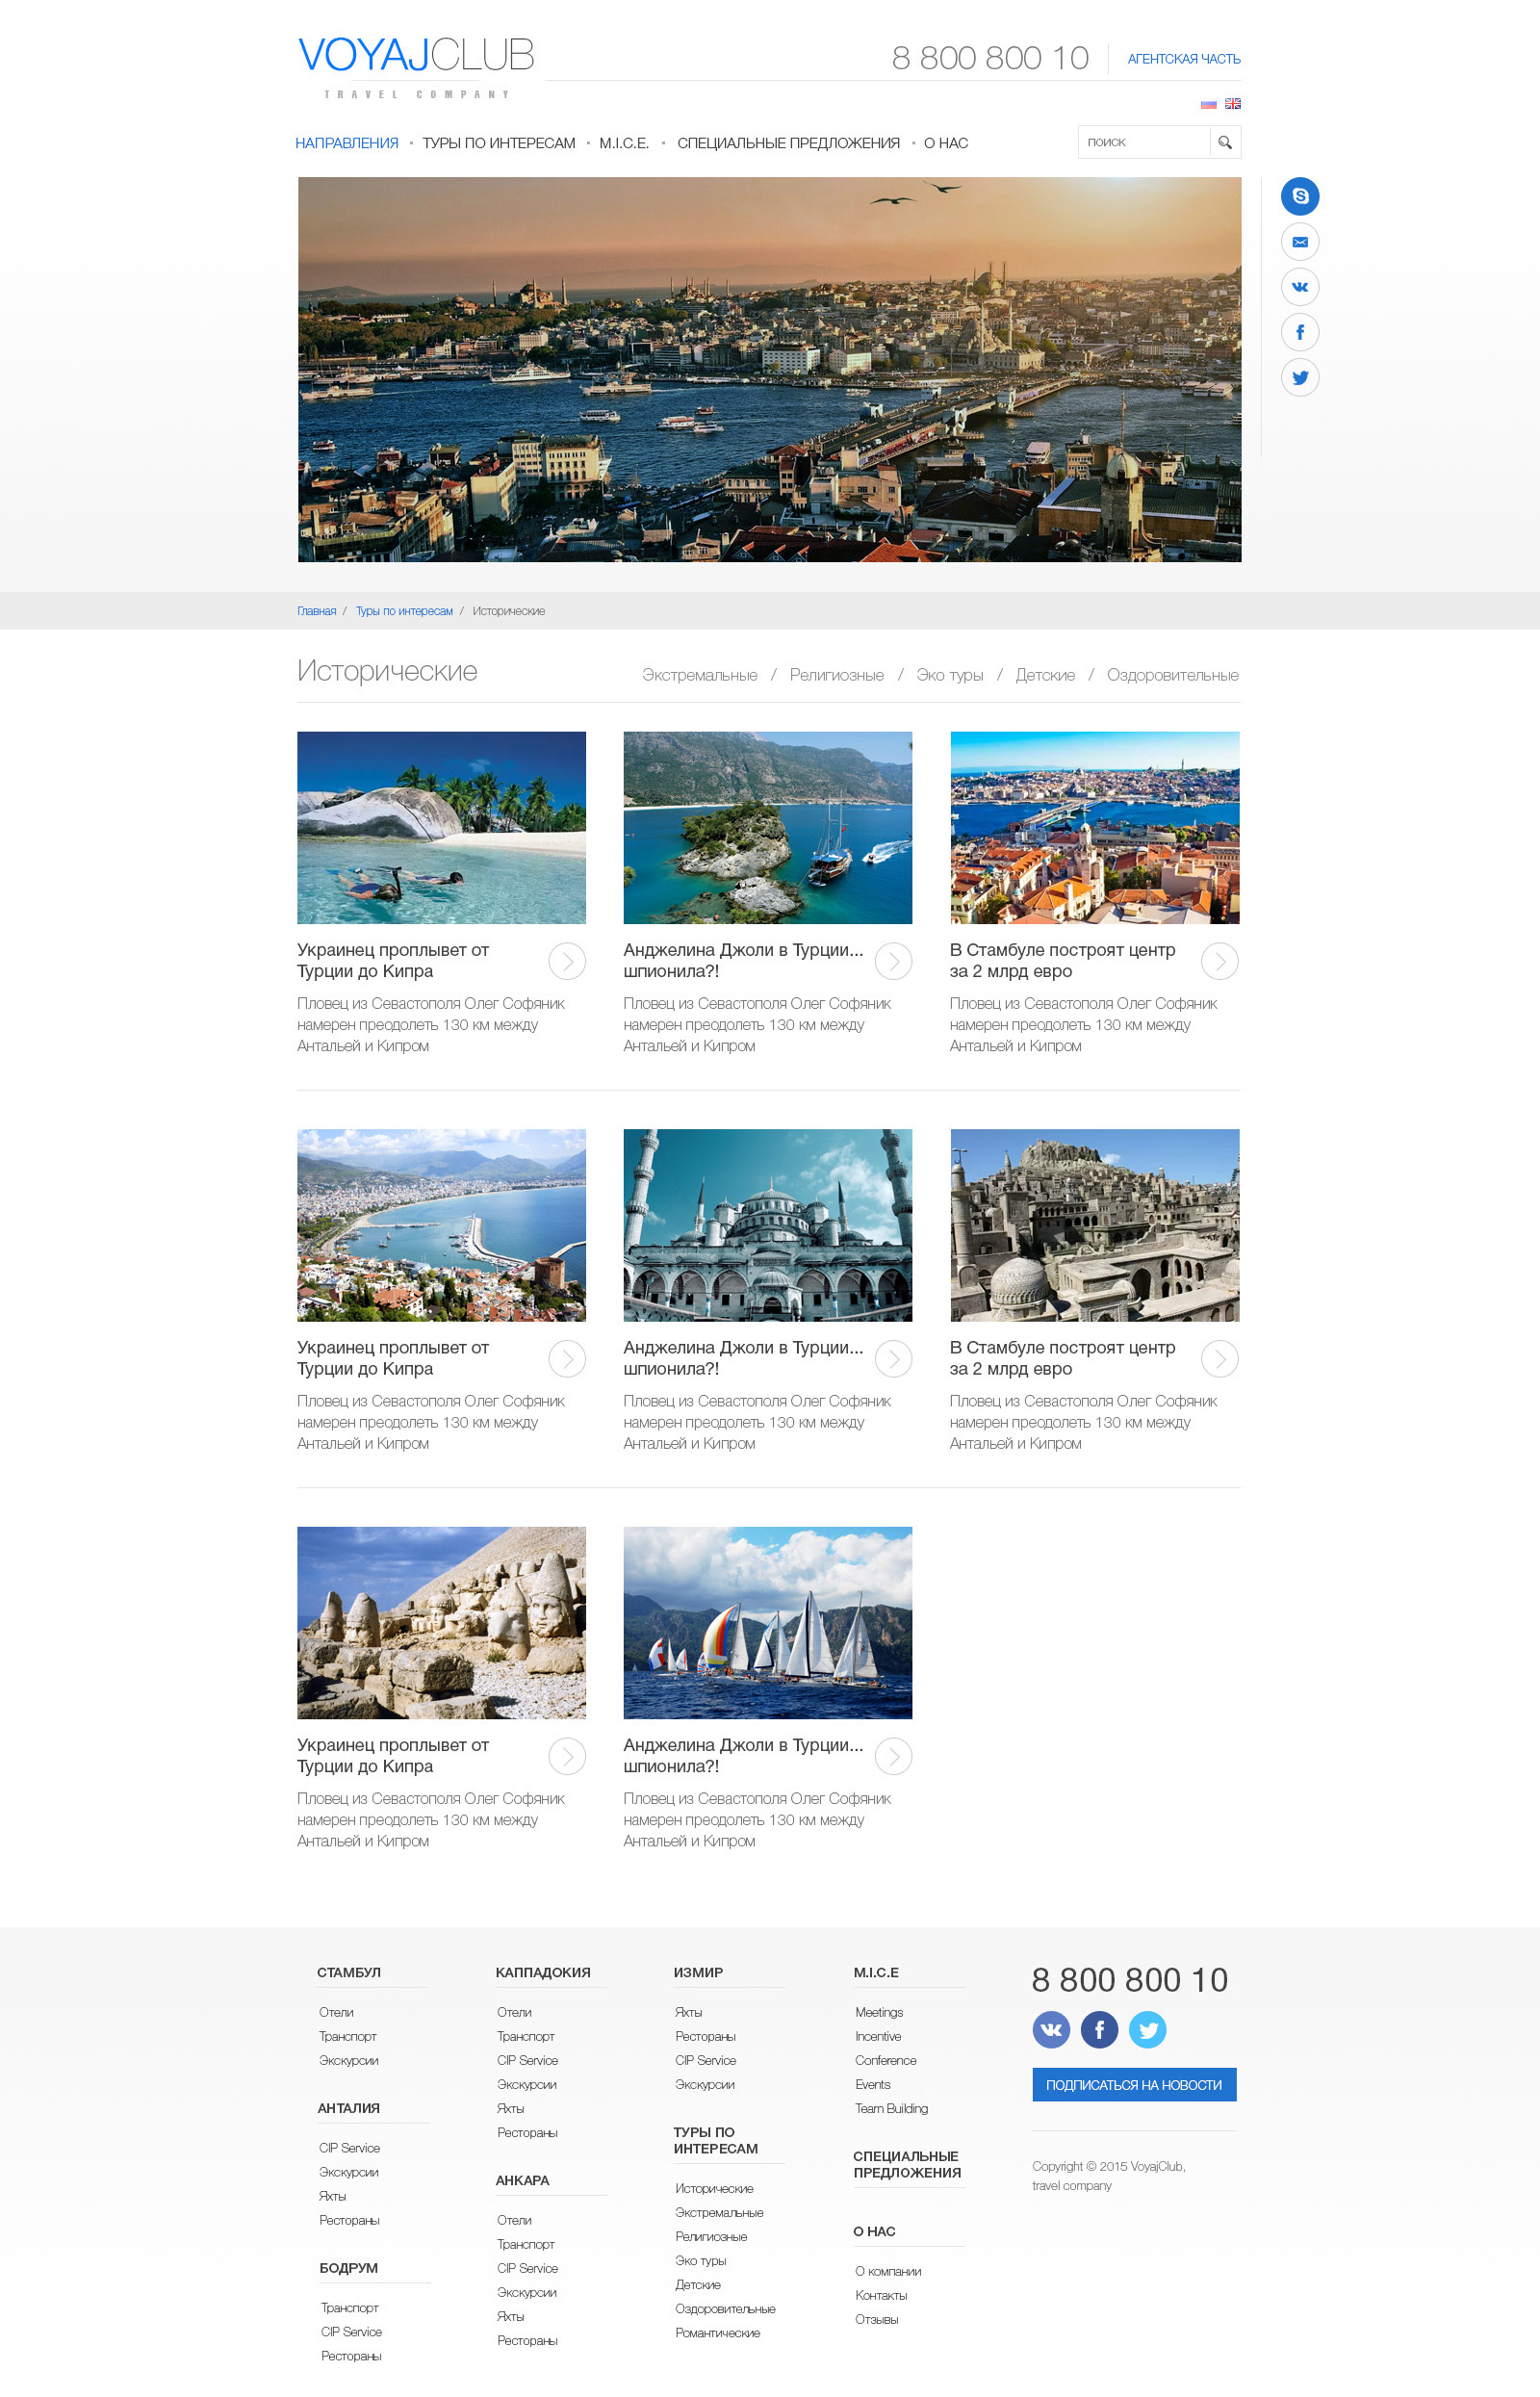 Striking and informative website of a travel agency in Turkey